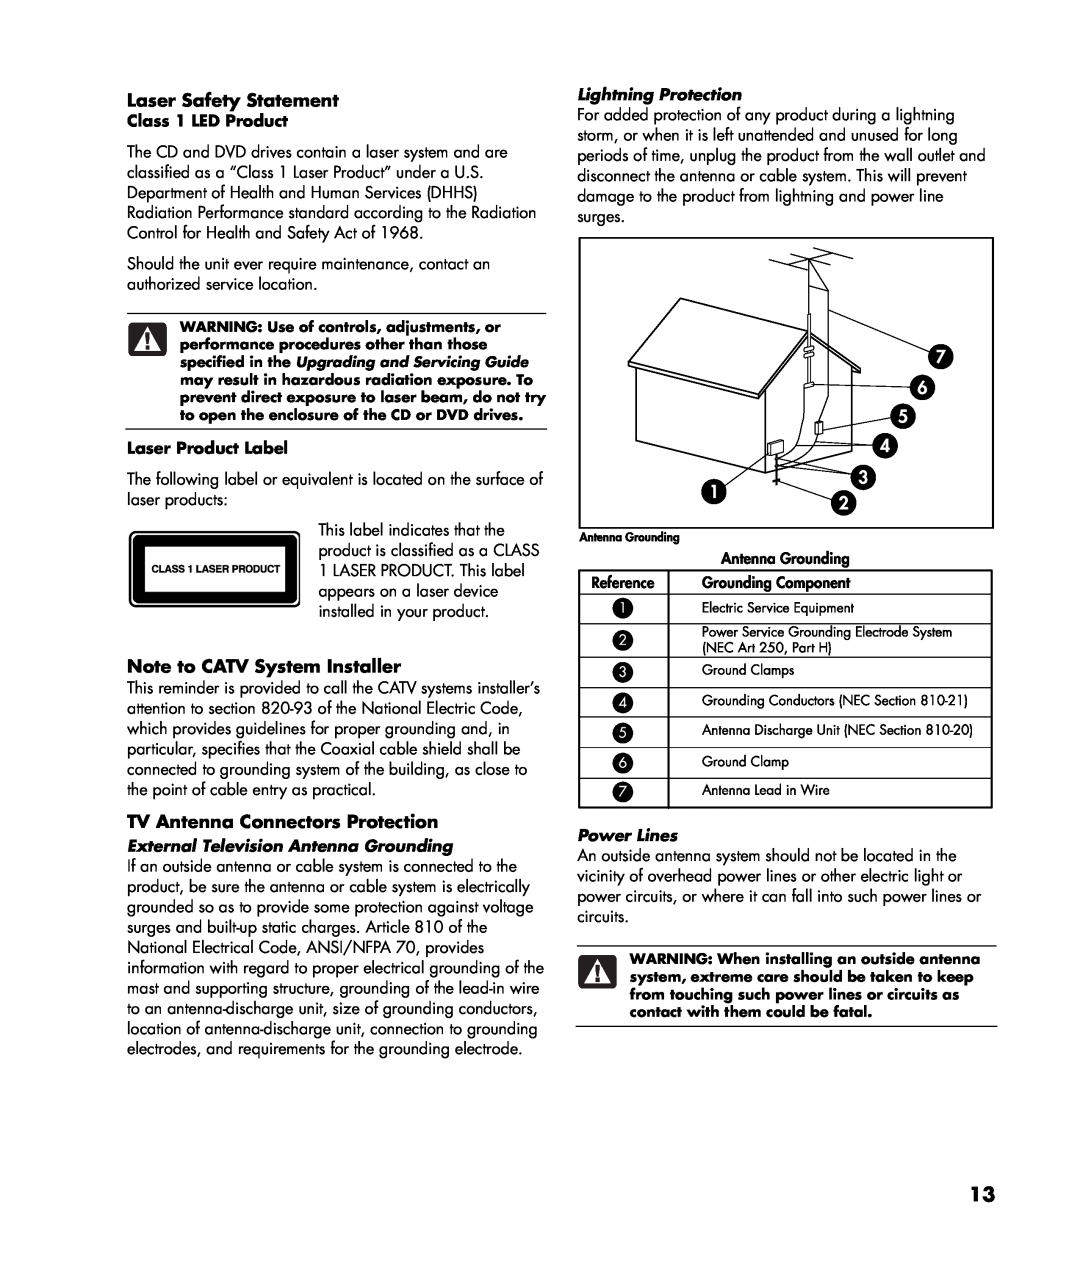 HP SR5023WM Laser Safety Statement, Note to CATV System Installer, TV Antenna Connectors Protection, Class 1 LED Product 